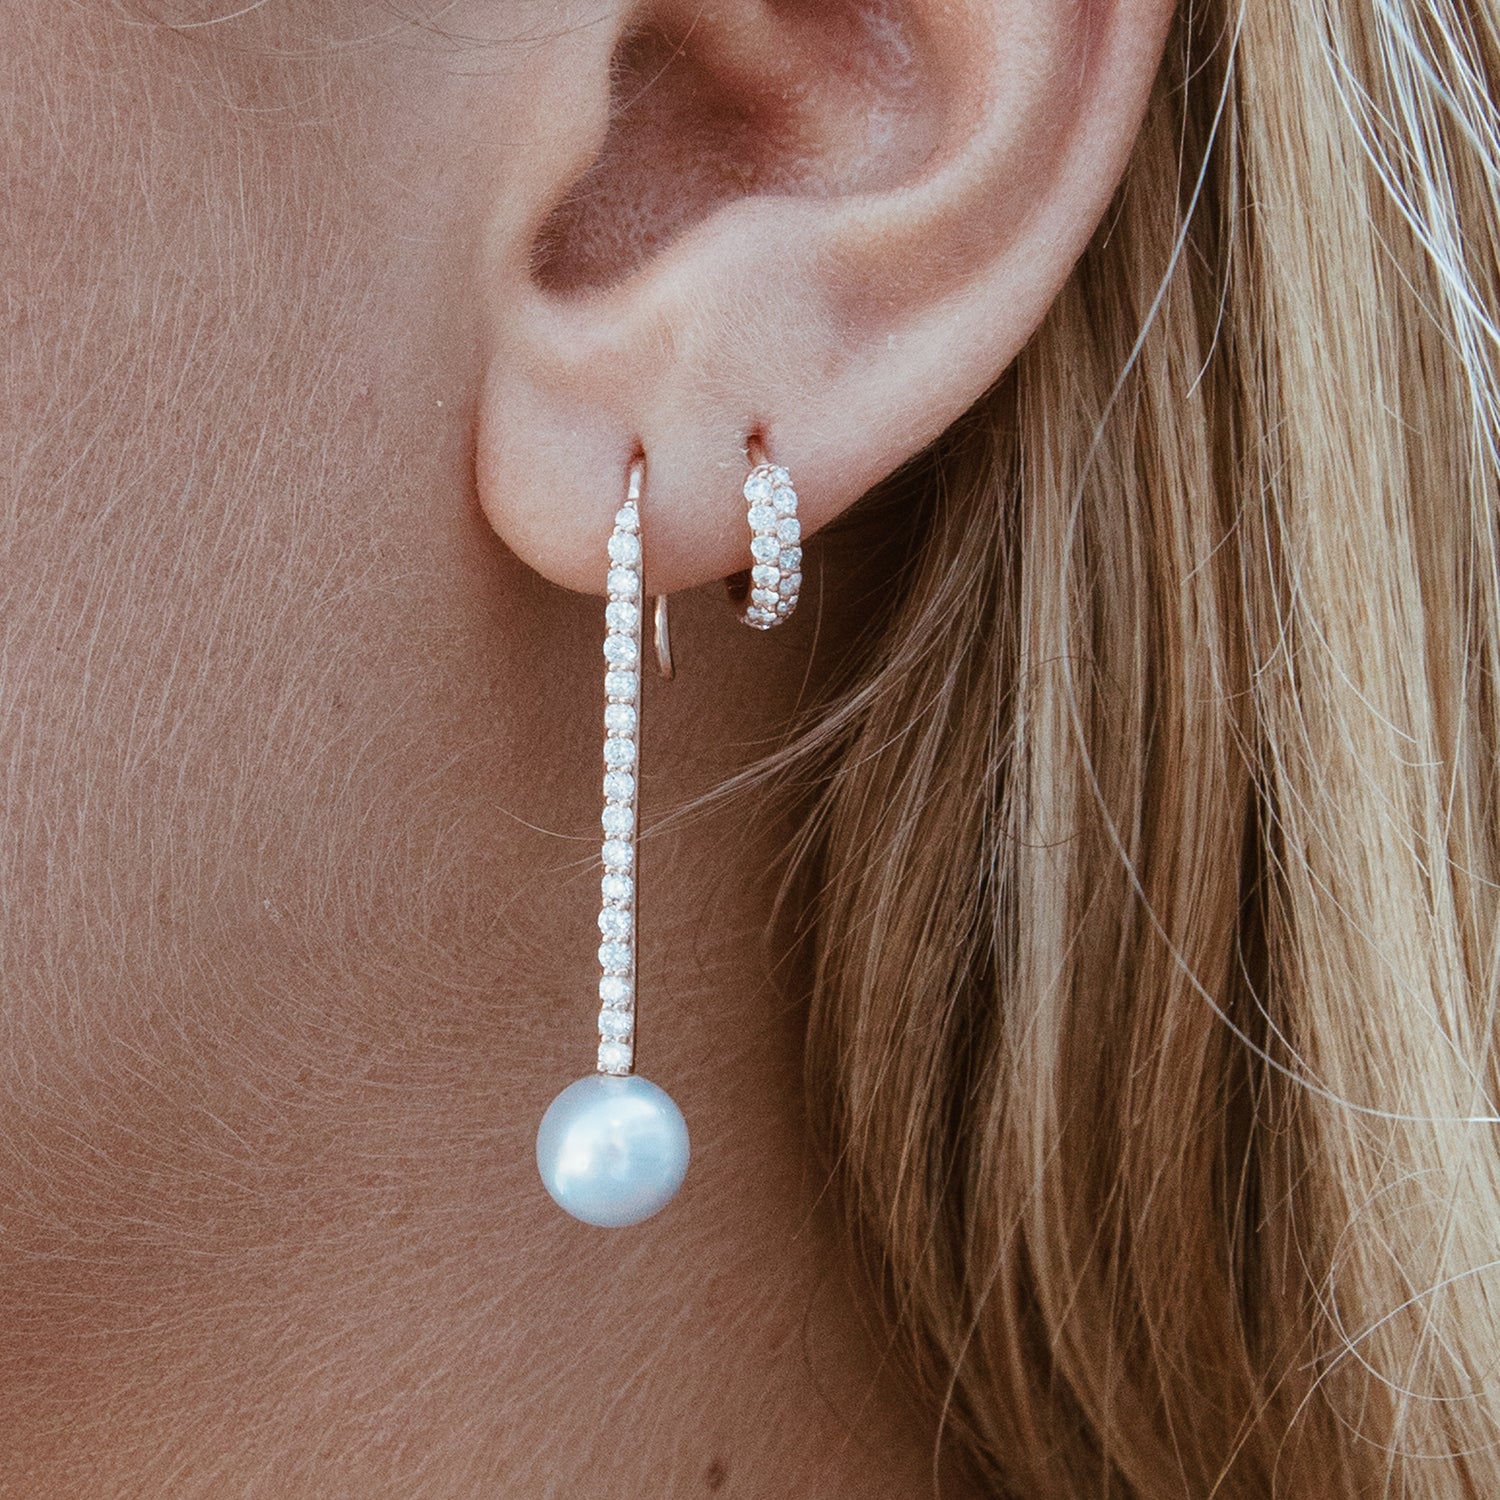 The Boom Huggie shown next to our Diamond Pearl Stick Earrings.